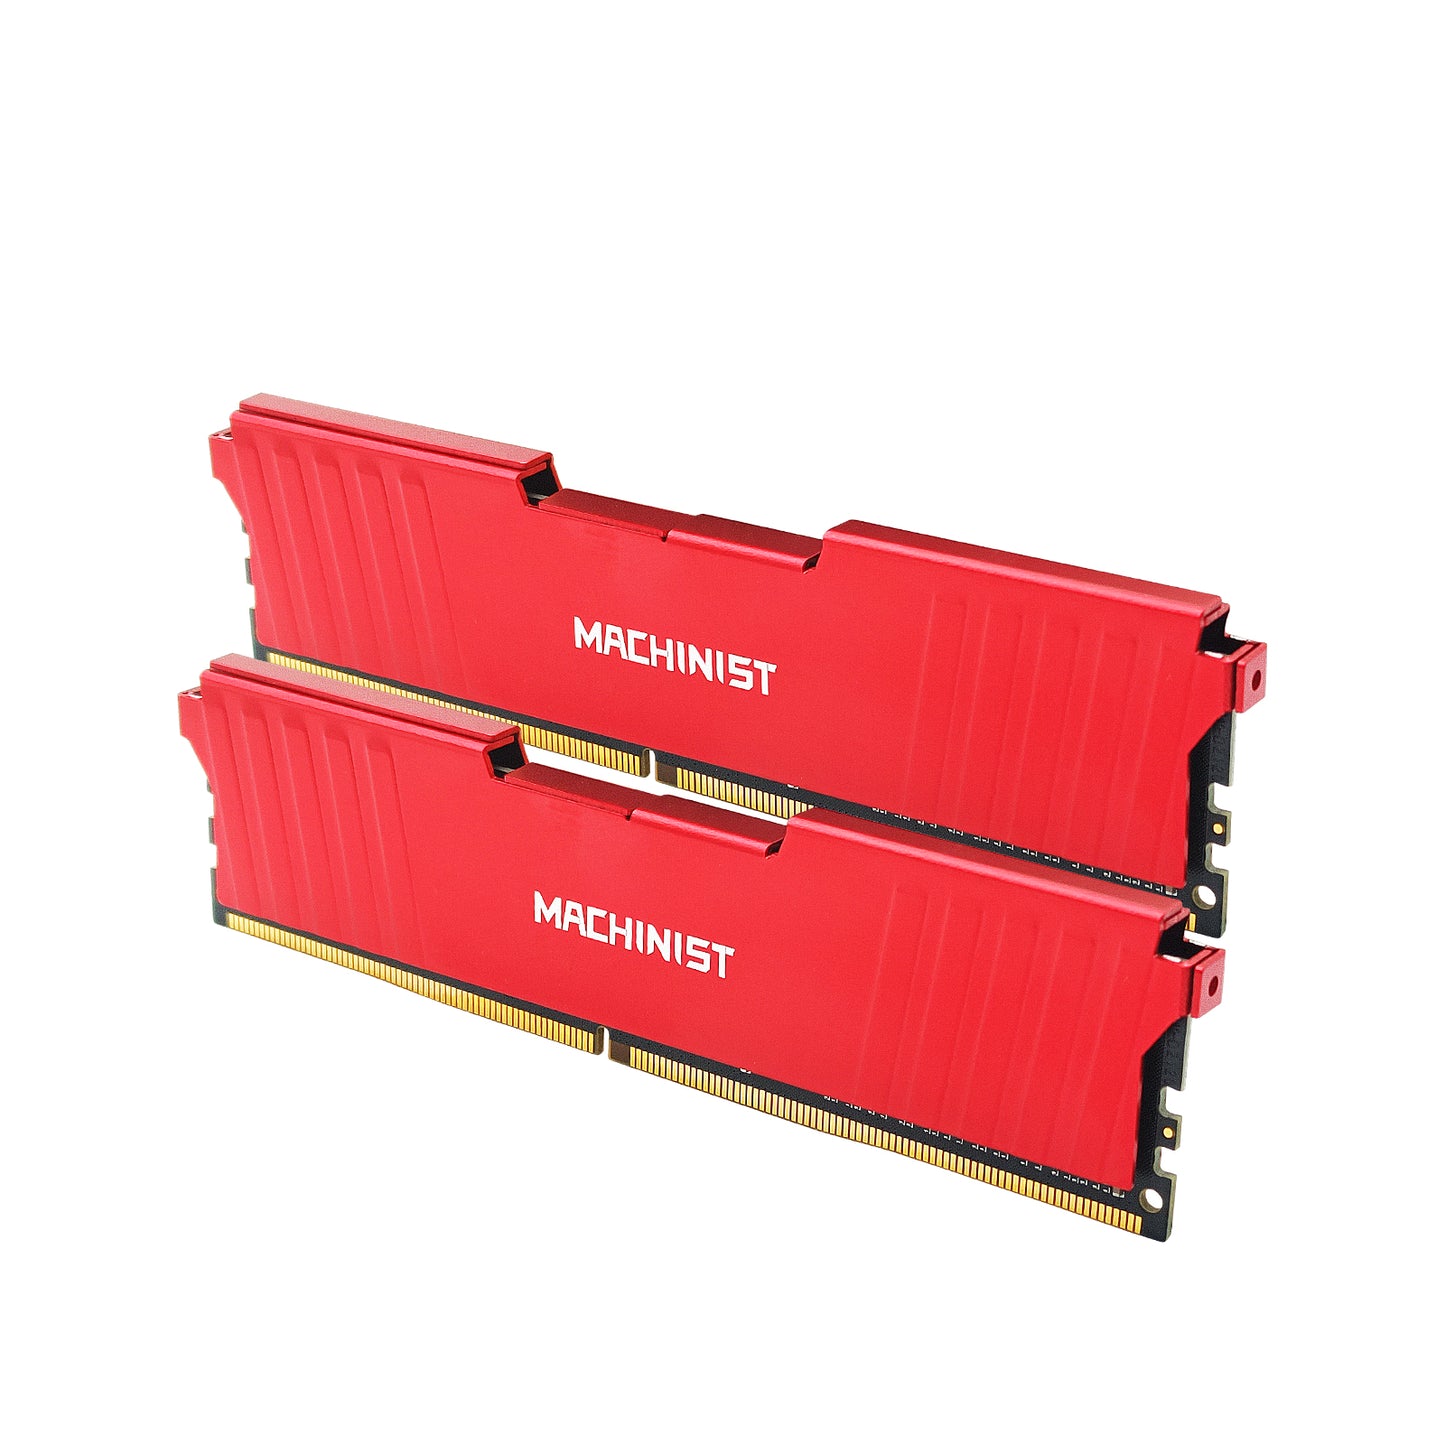 MACHINIST DDR4 RAM 16GB(2x8GB) Desktop Memory Kit 2666MHz DIMM PC4-21300 CL15-15-15-35 1.2V Computer Gaming Memory Module 288 Pin Dual Channel PC RAM Support Overclocking (Red)